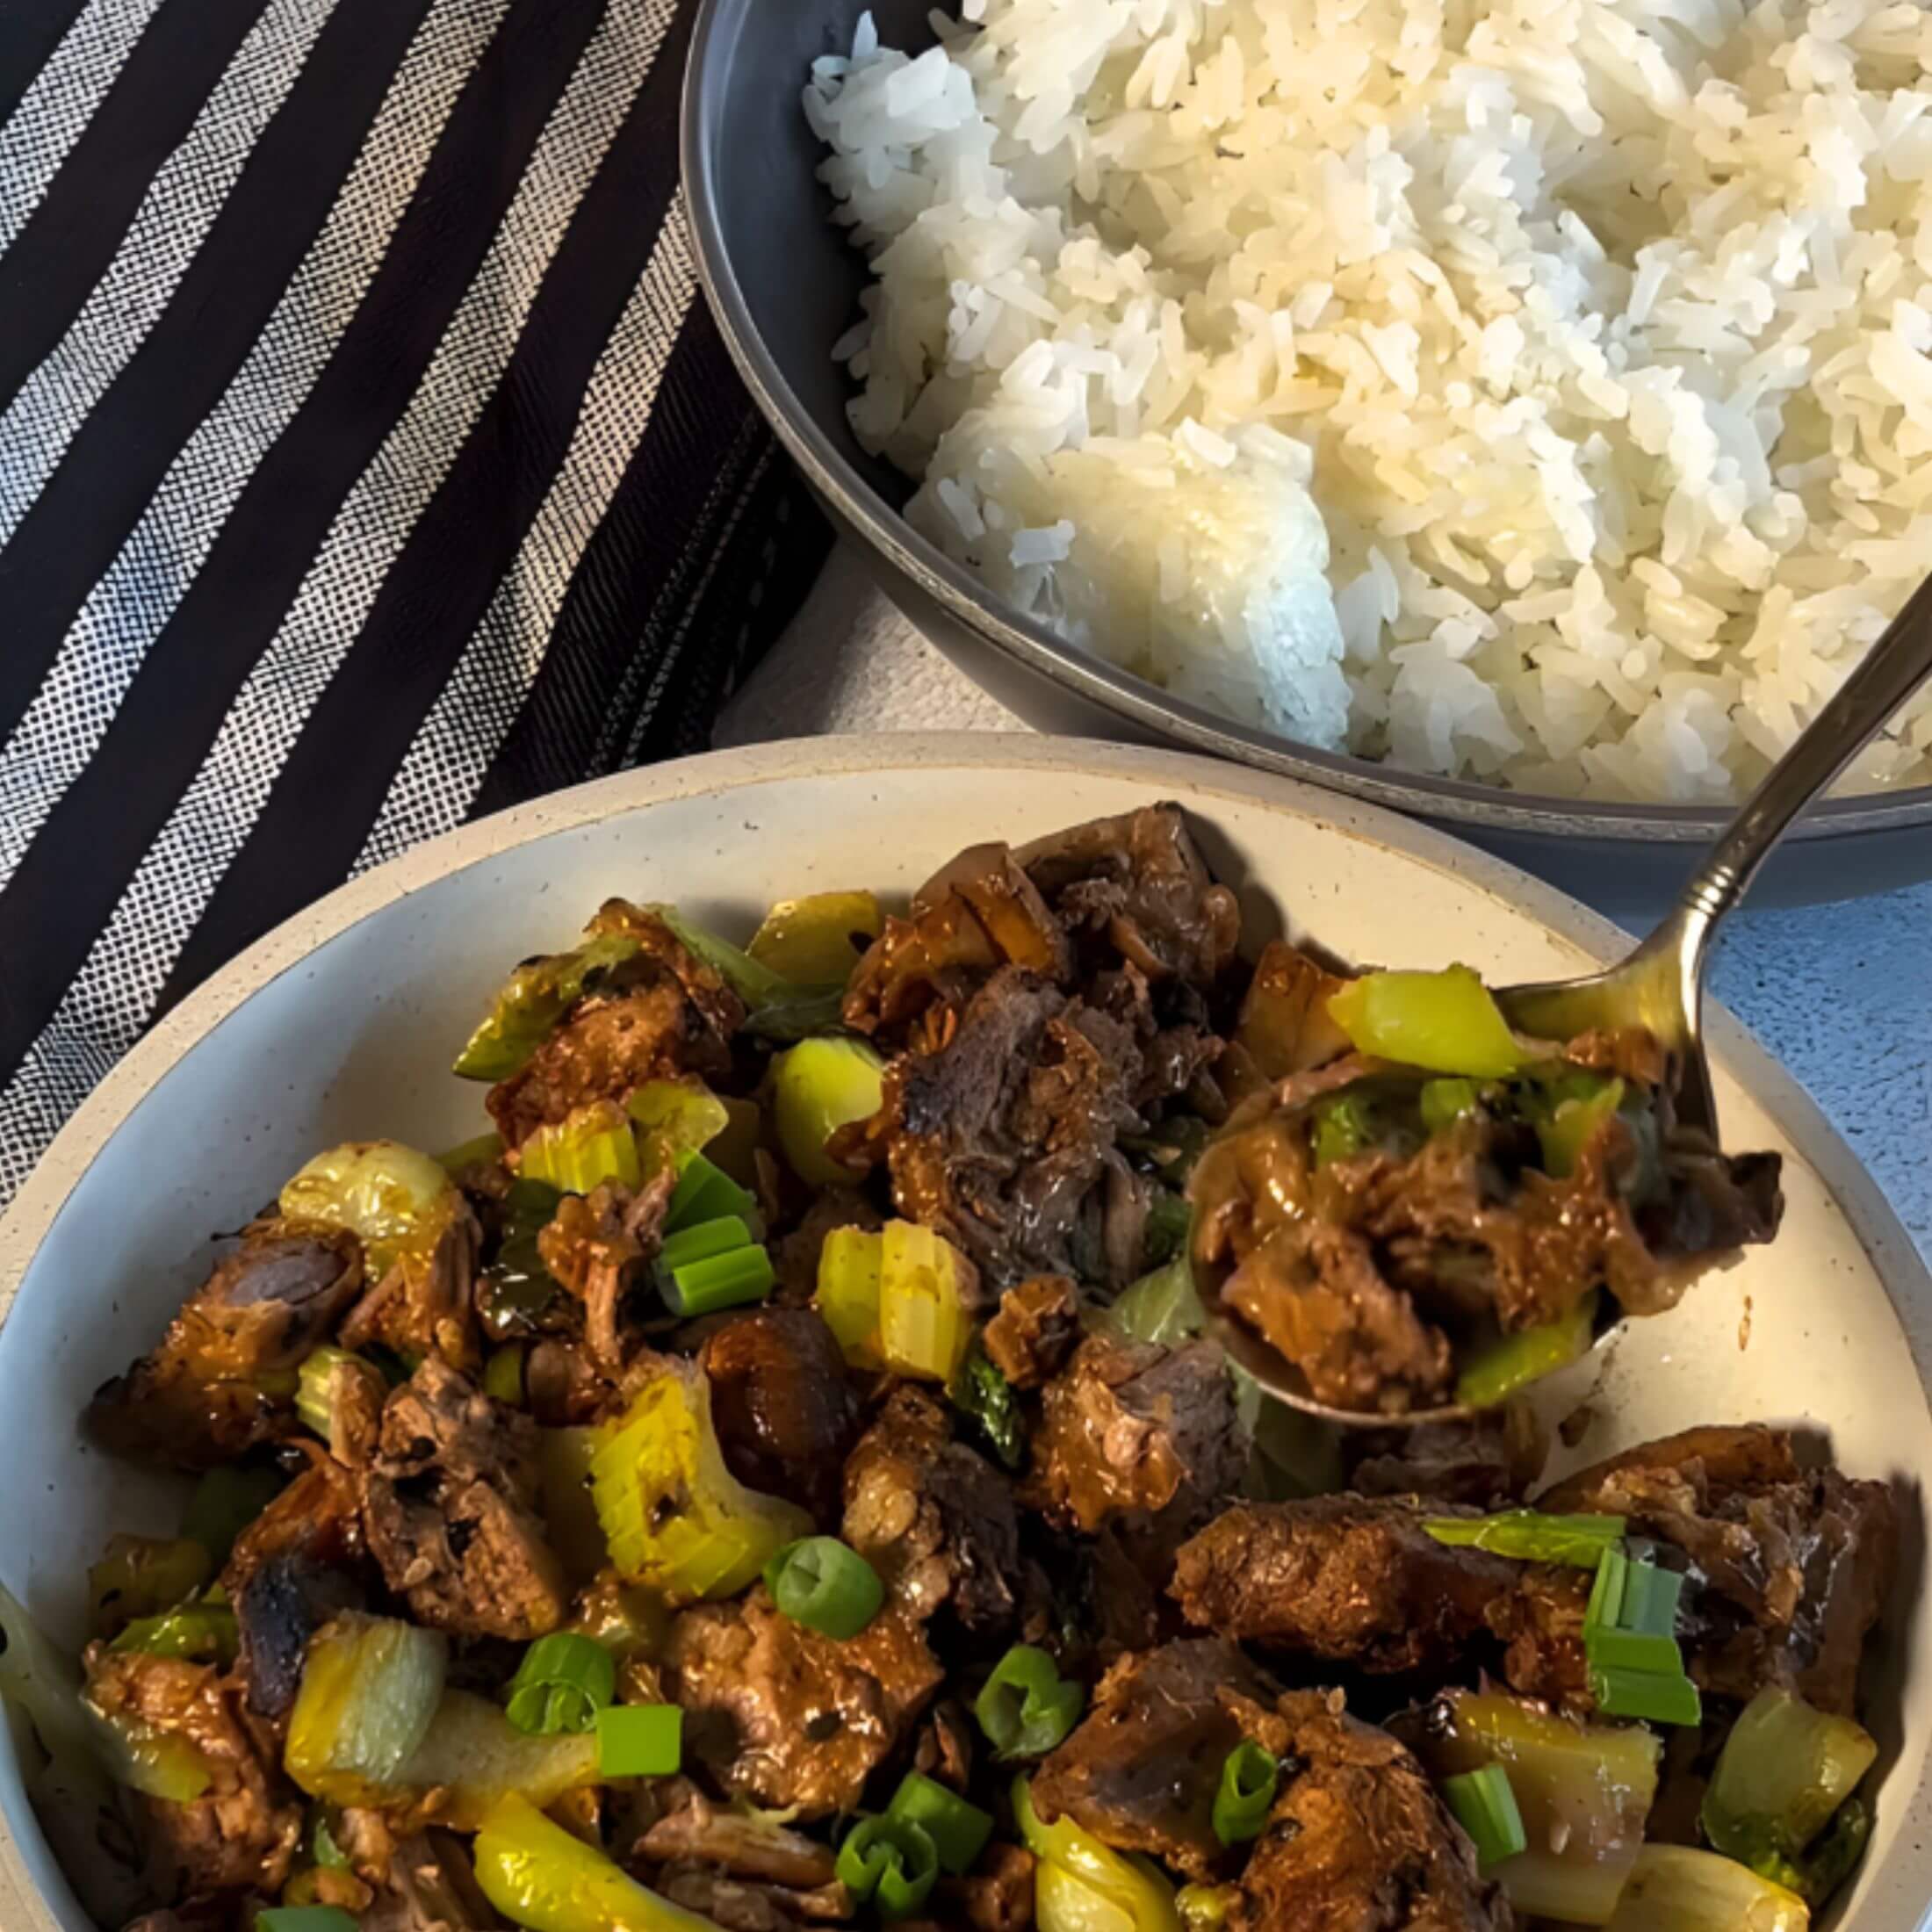 Stir Fry Beef and Vegetables next to white rice